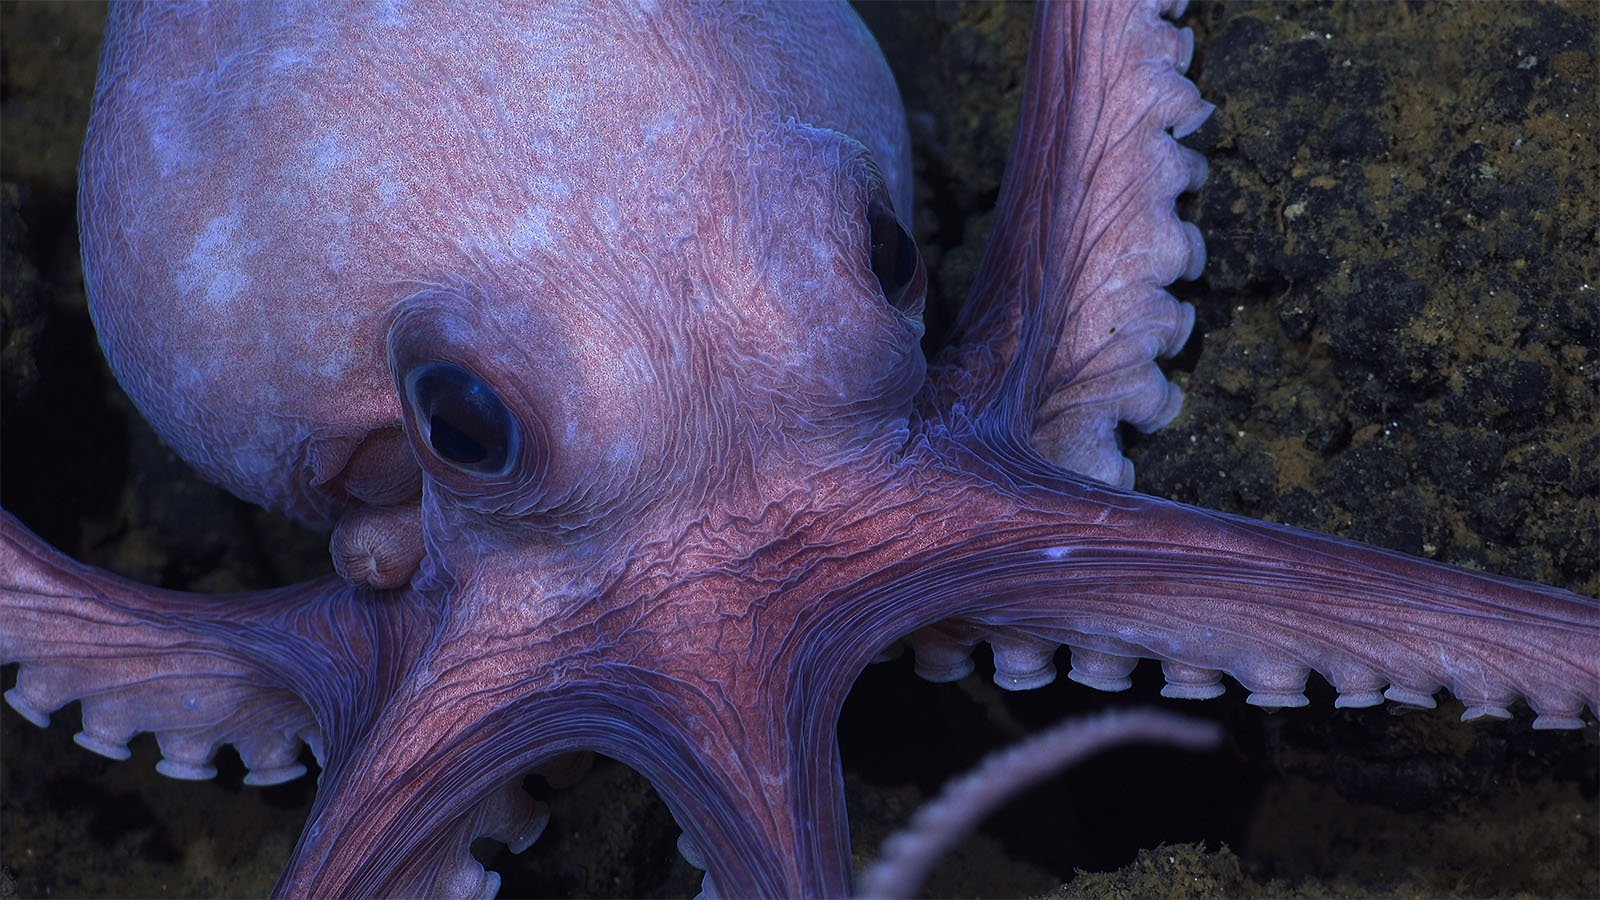 Close-up image of a vampire squid underwater, showing its large, dark eye and distinctive webbed arms with spiky edges, against a rocky backdrop.